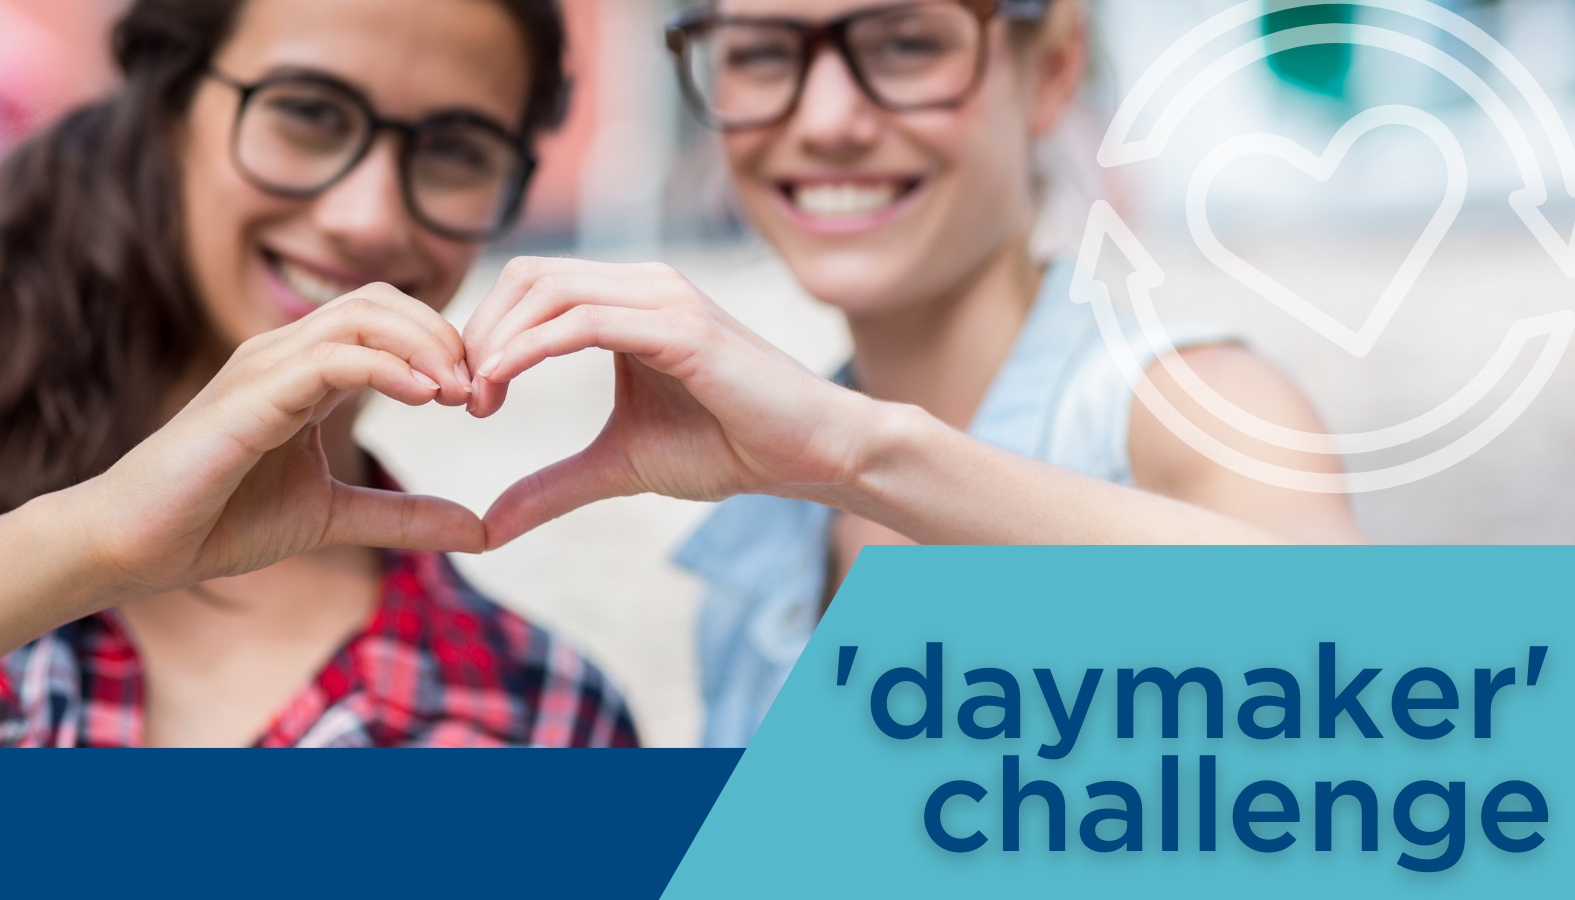 Our ‘Daymaker’ Challenge